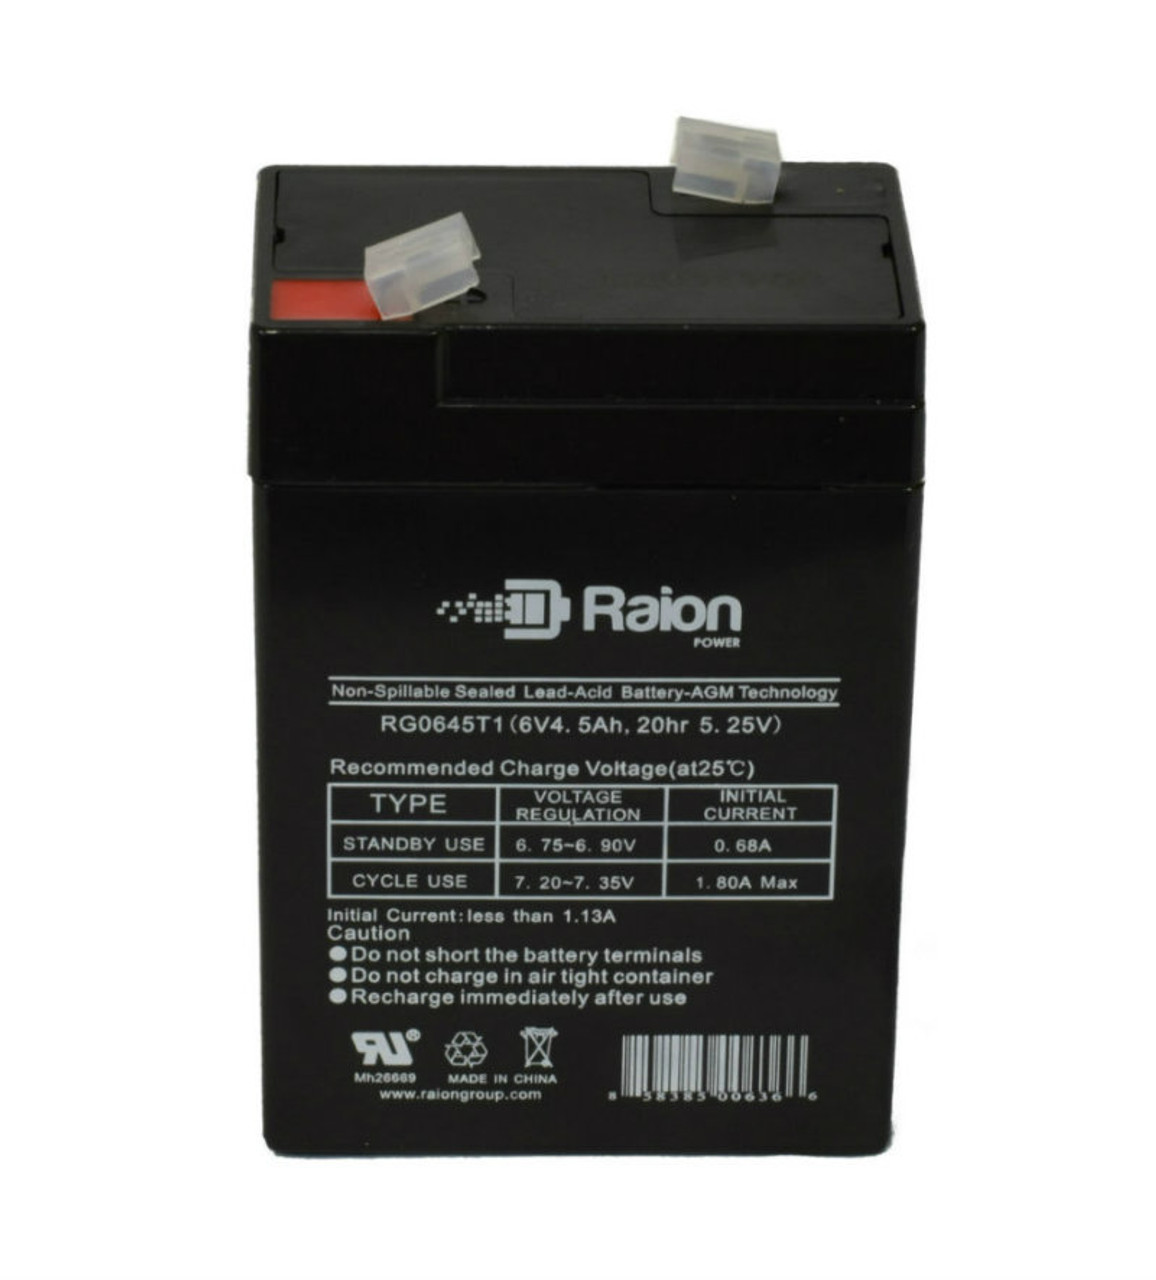 Raion Power RG0645T1 Replacement Battery Cartridge for Light Alarms CE15BF